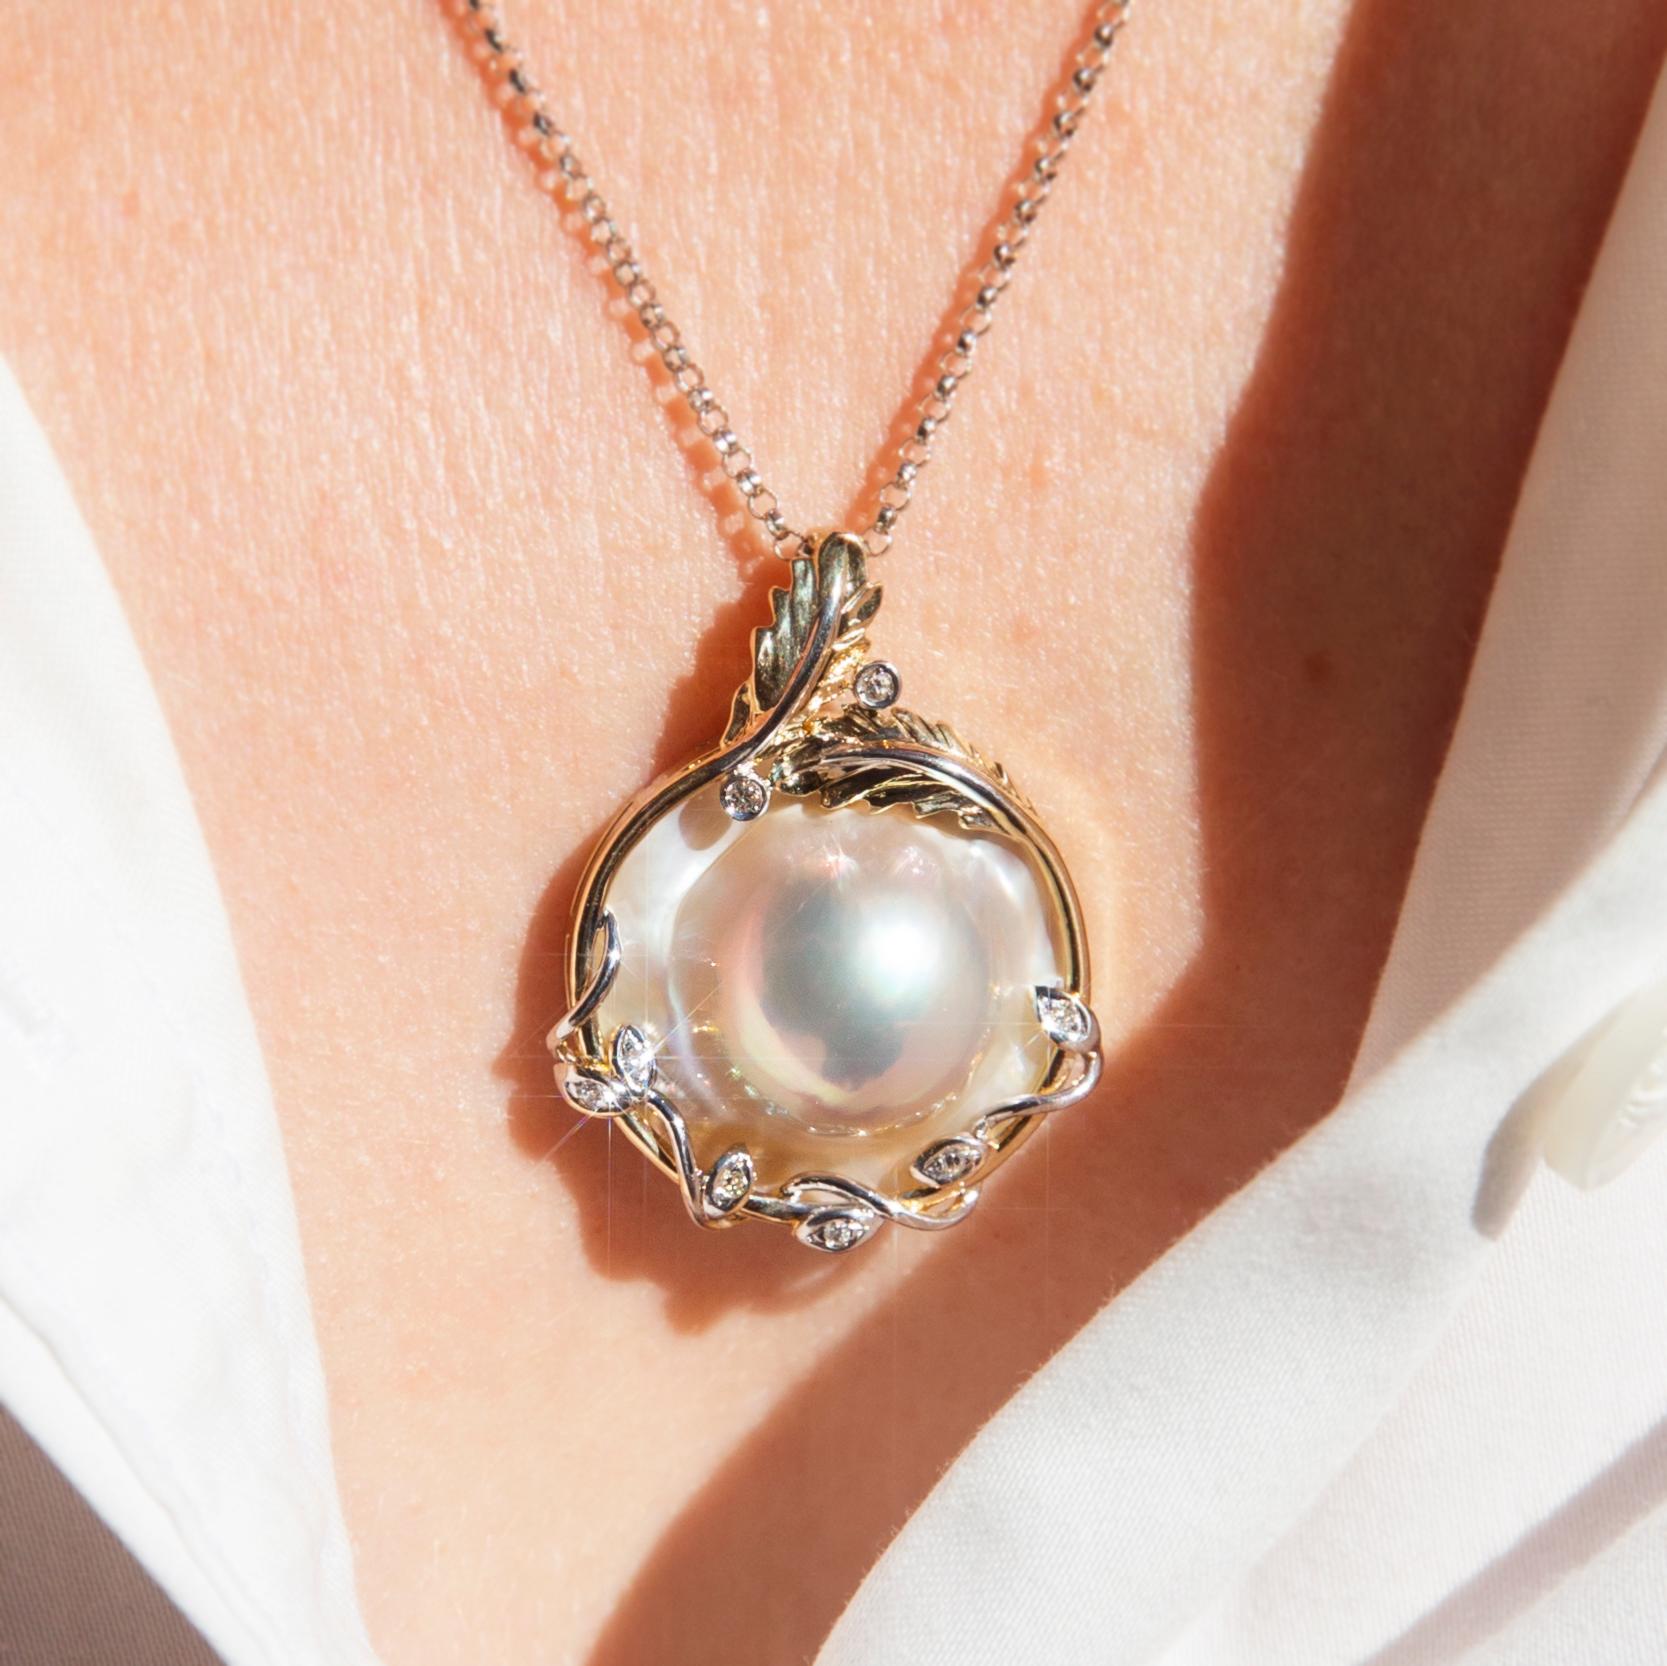 Crafted in 10 carat yellow and white gold, this darling leaf-like pendant features a gorgeous mabe pearl set into an elegant twisted frame set with round brilliant cut diamonds and finished with a white gold chain. Her name is The Vivienne Pendant &